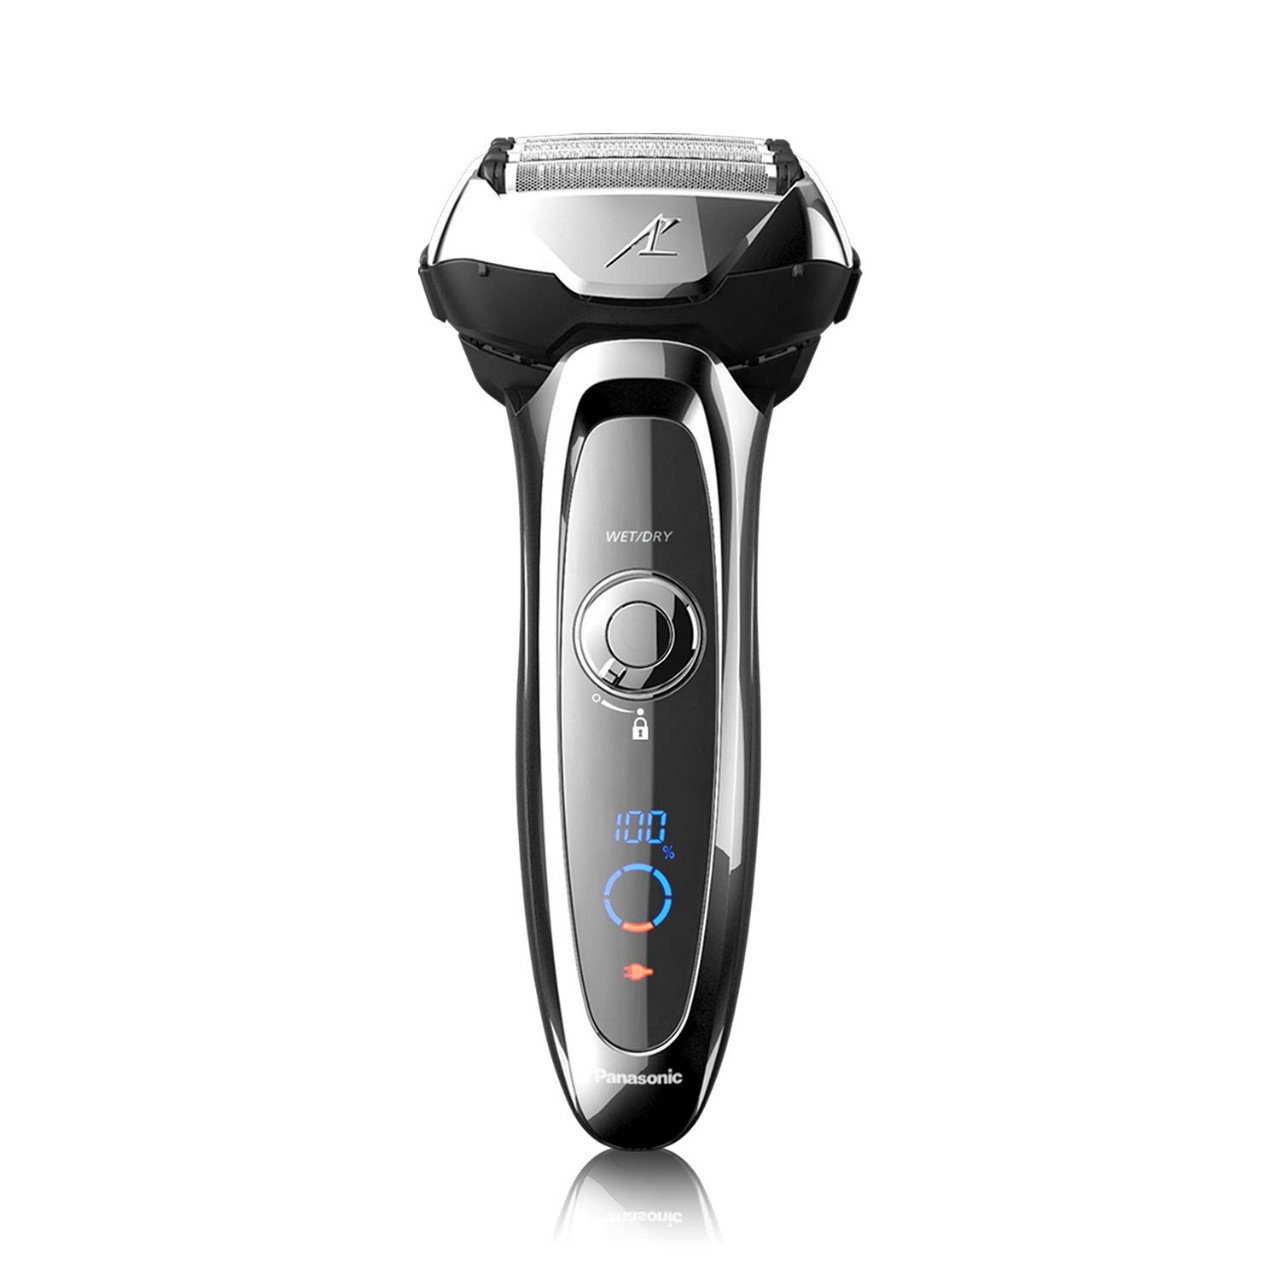 Panasonic Arc5 Electric Razor, Men's 5-blade Cordless with shave sensor technology and Wet/Dry